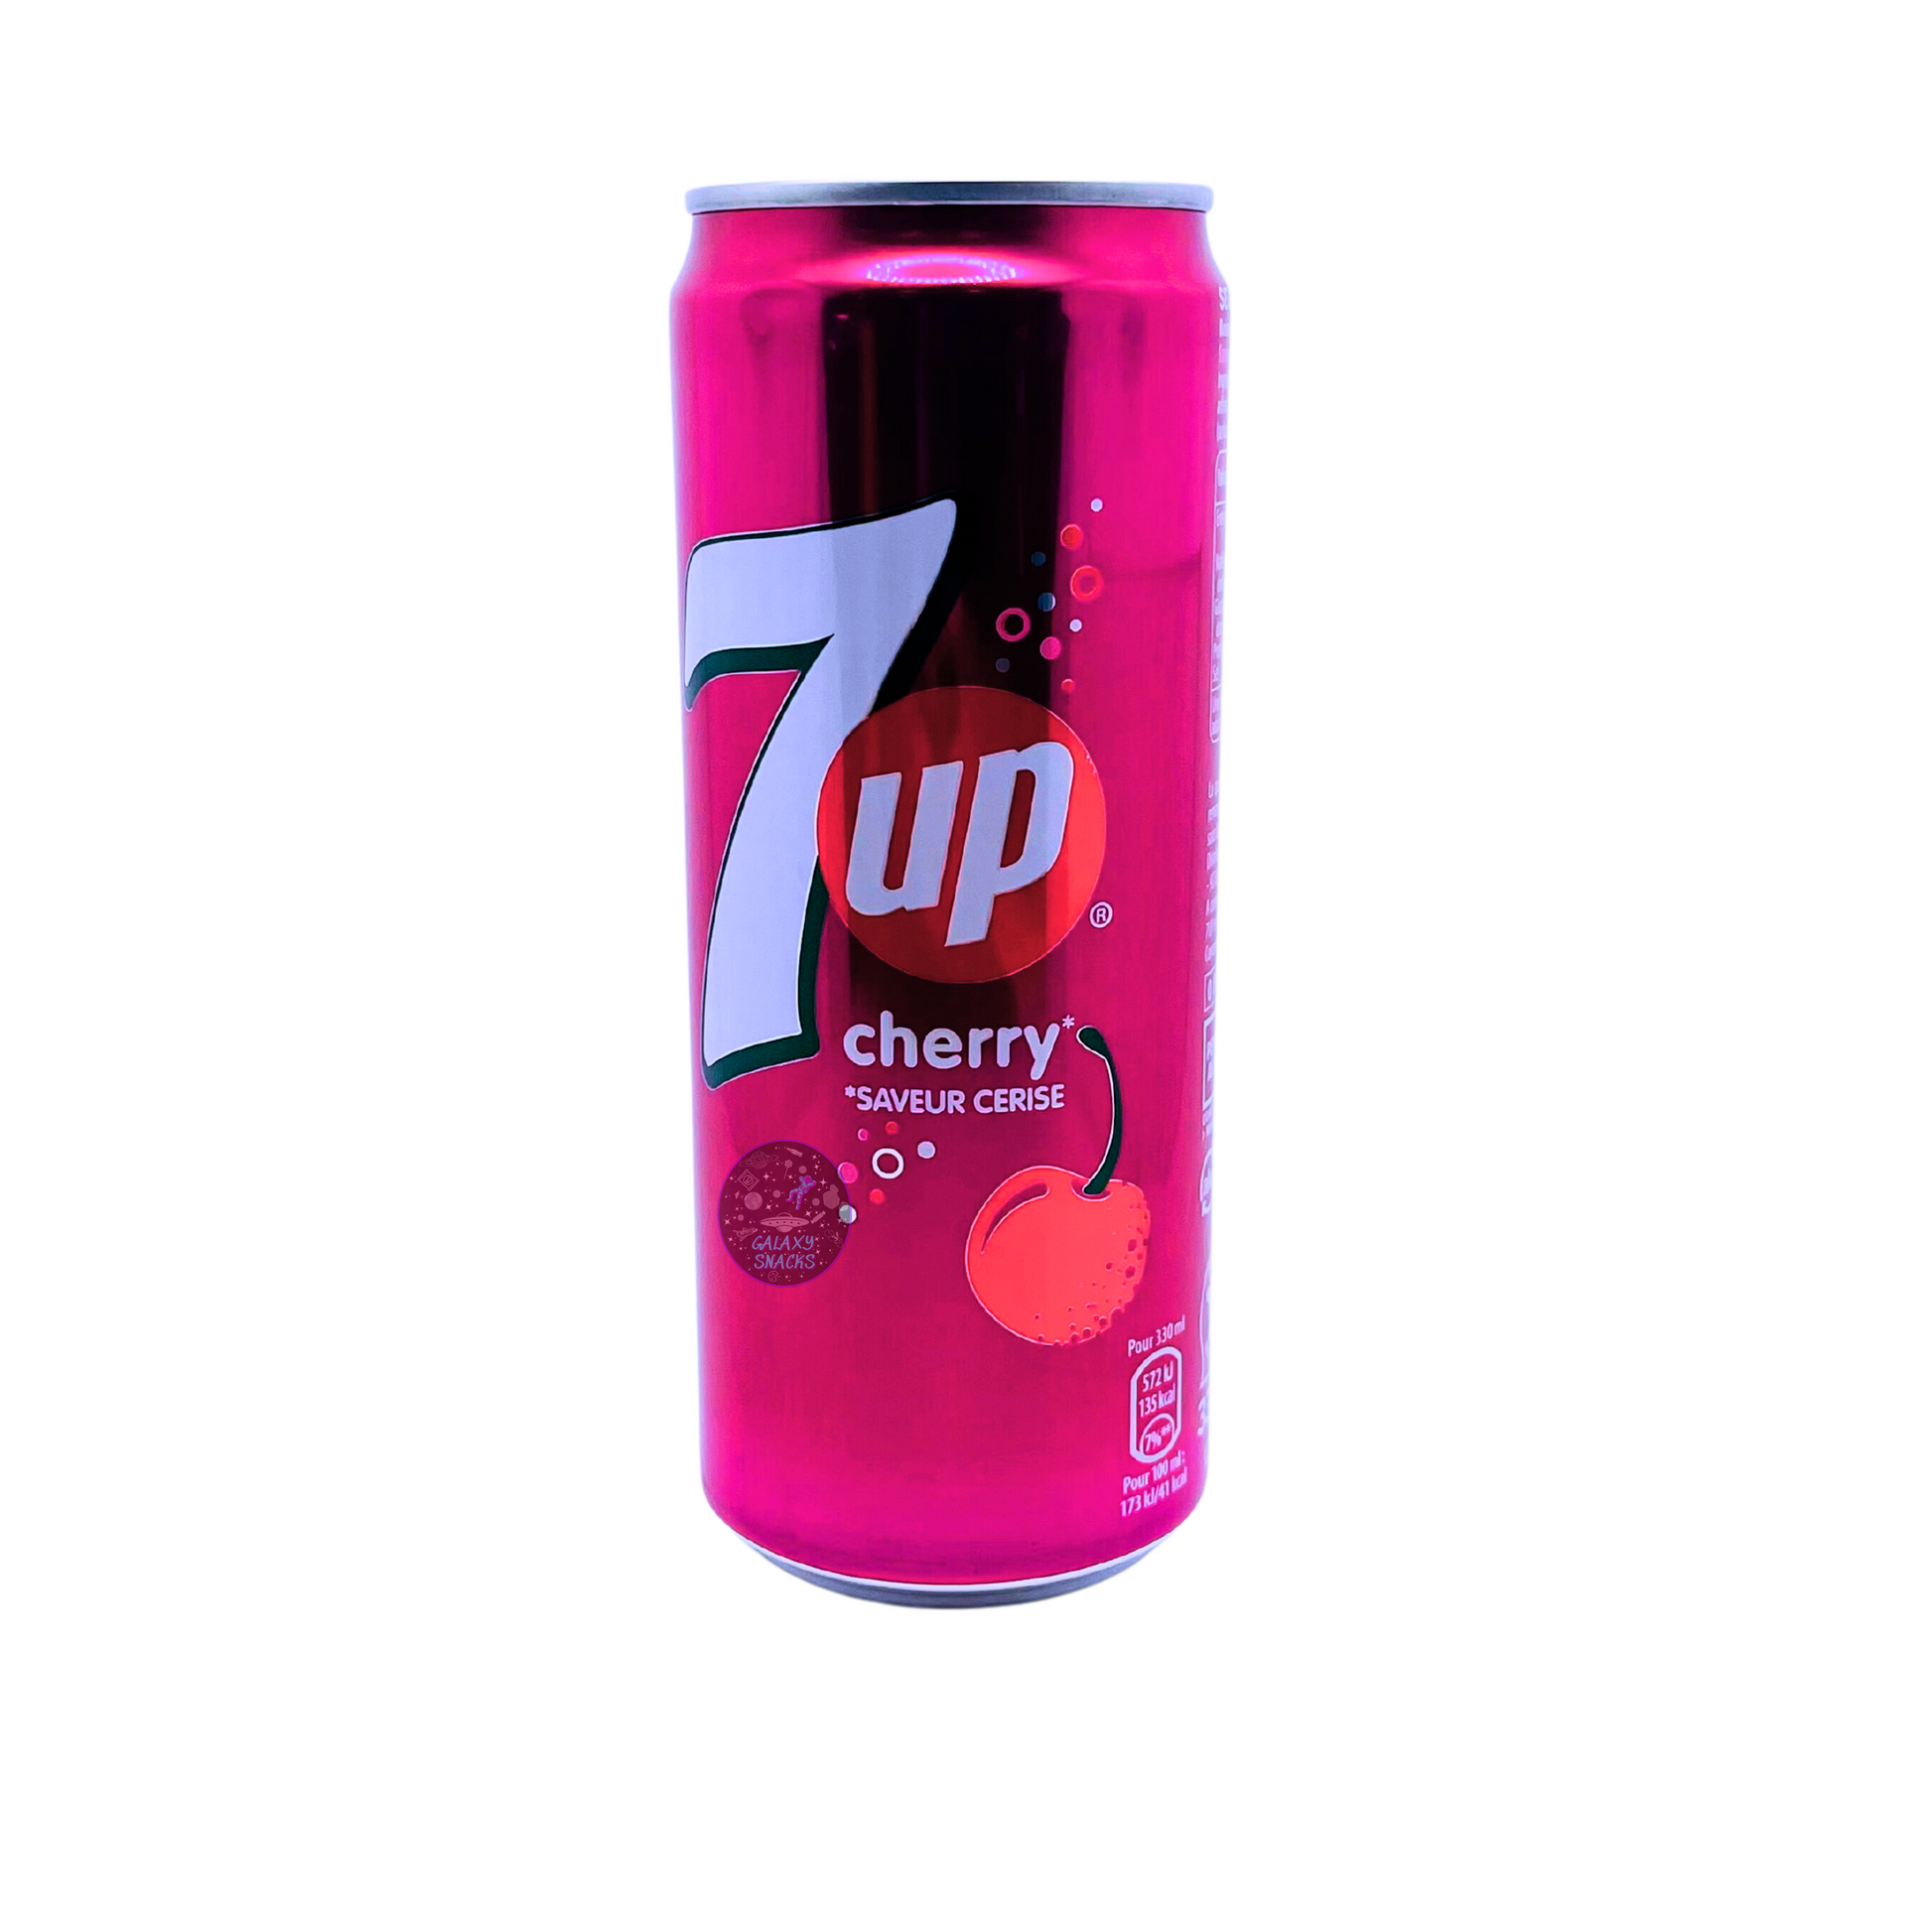 7UP Cherry (France)